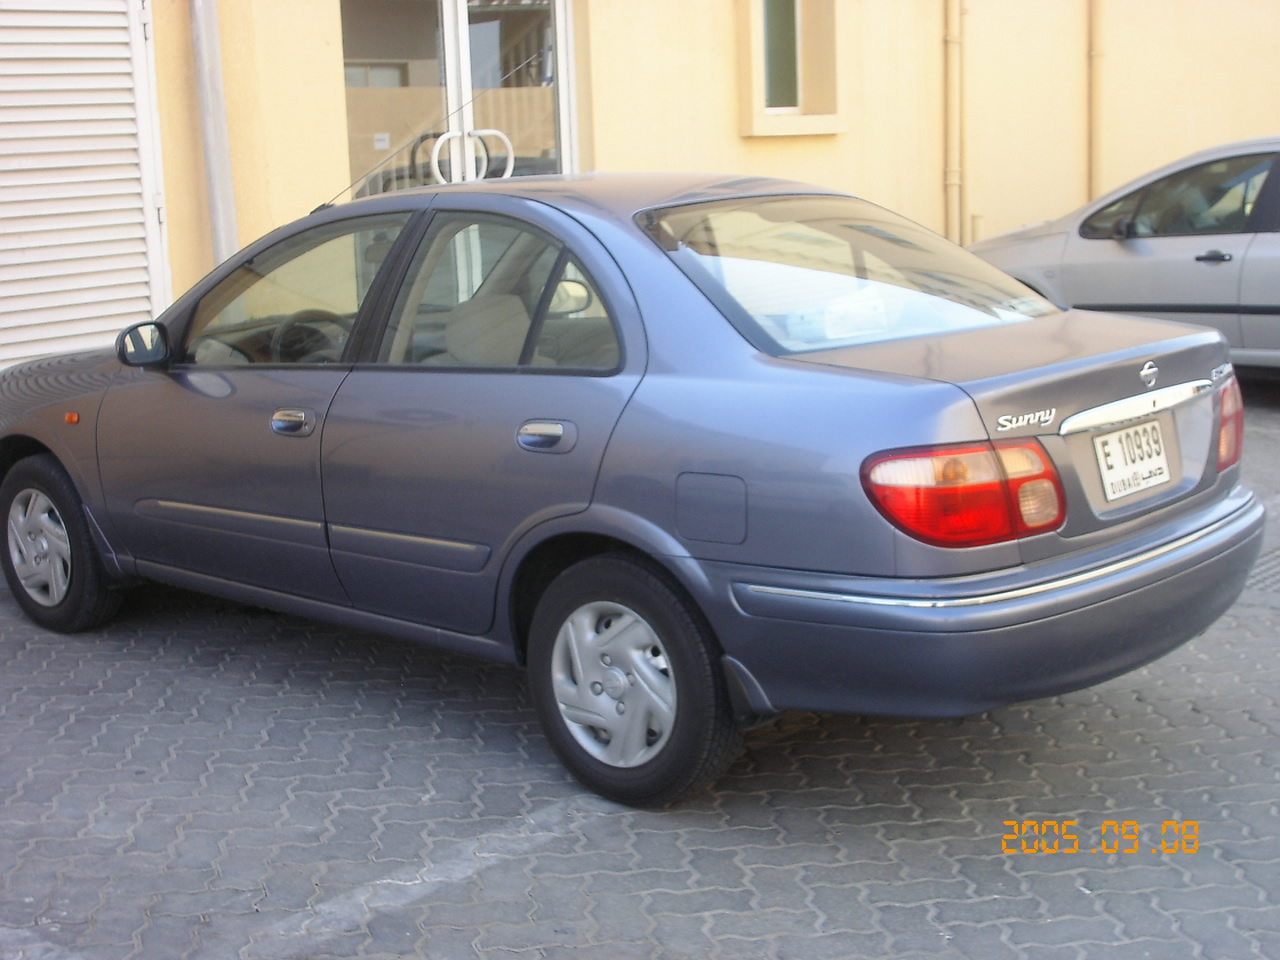 2003 Nissan sunny pictures #3